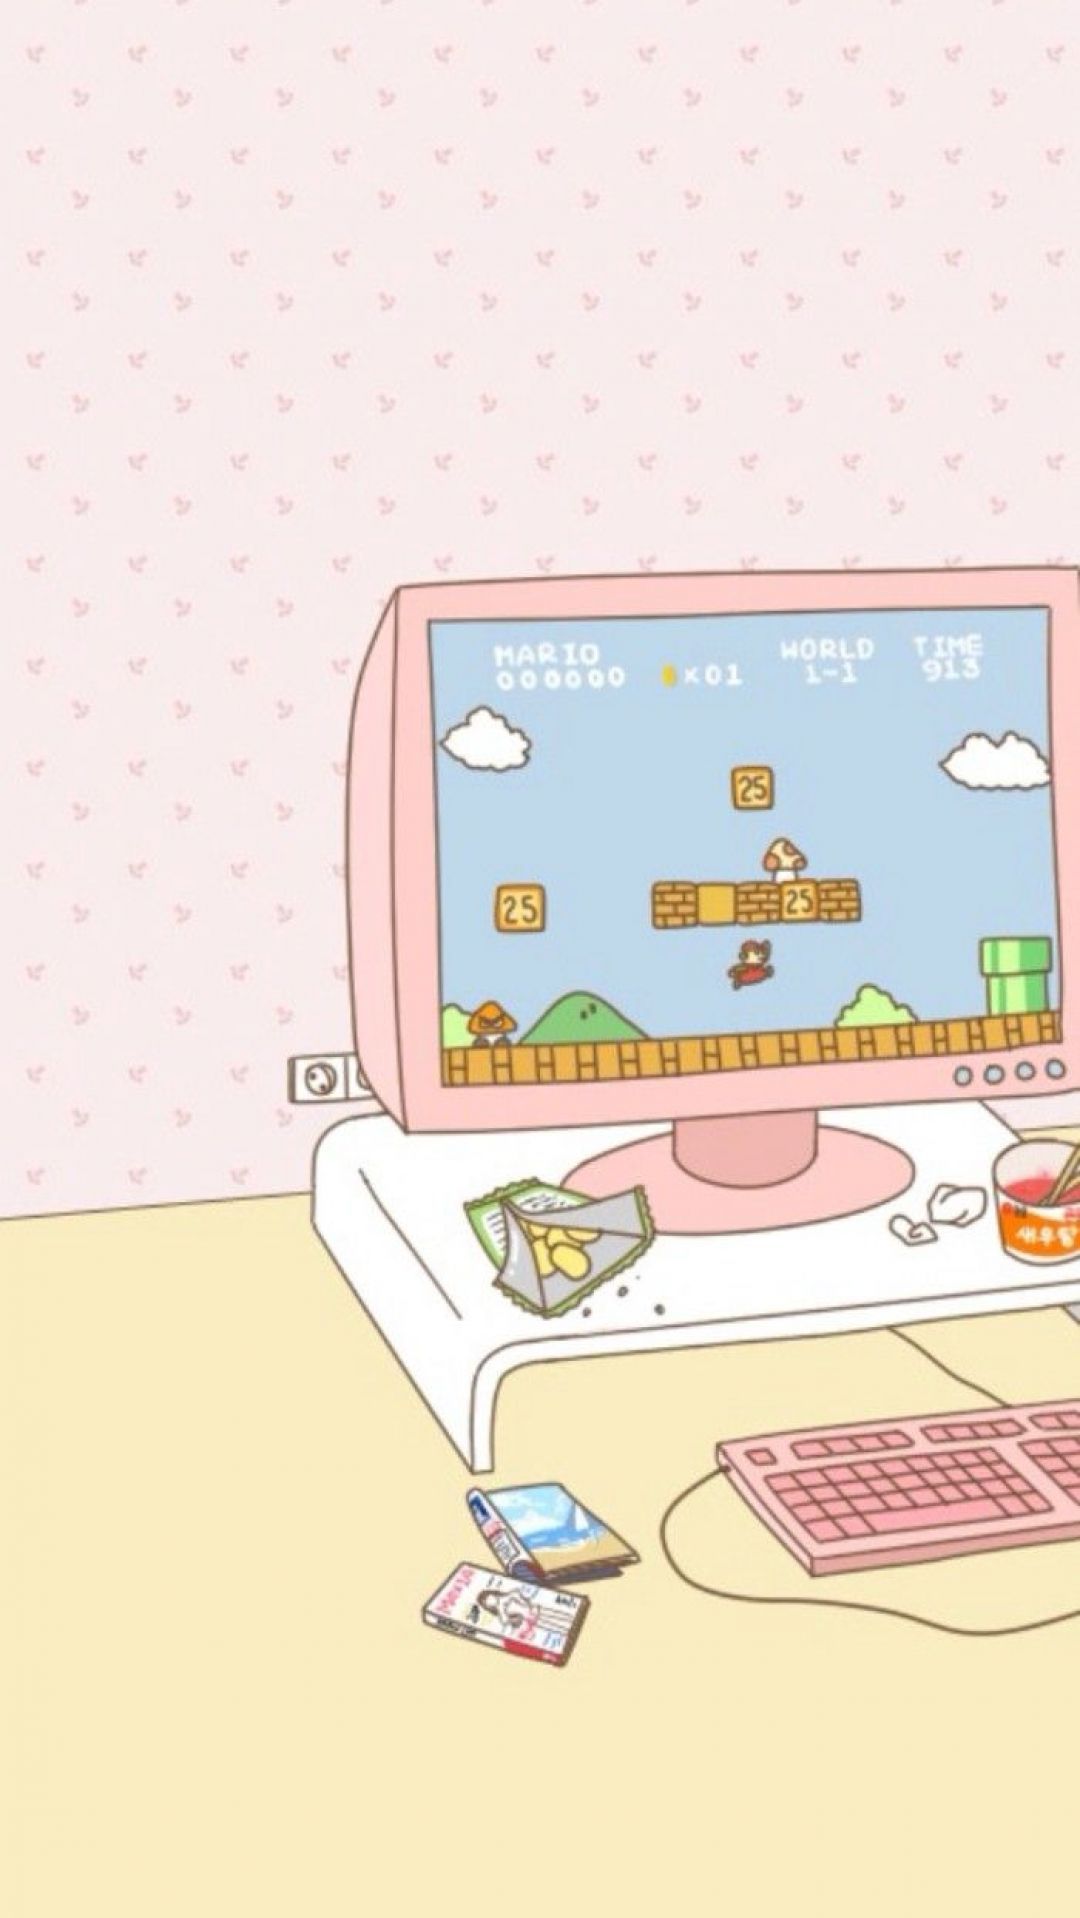 A computer with games on it and other items - Kawaii